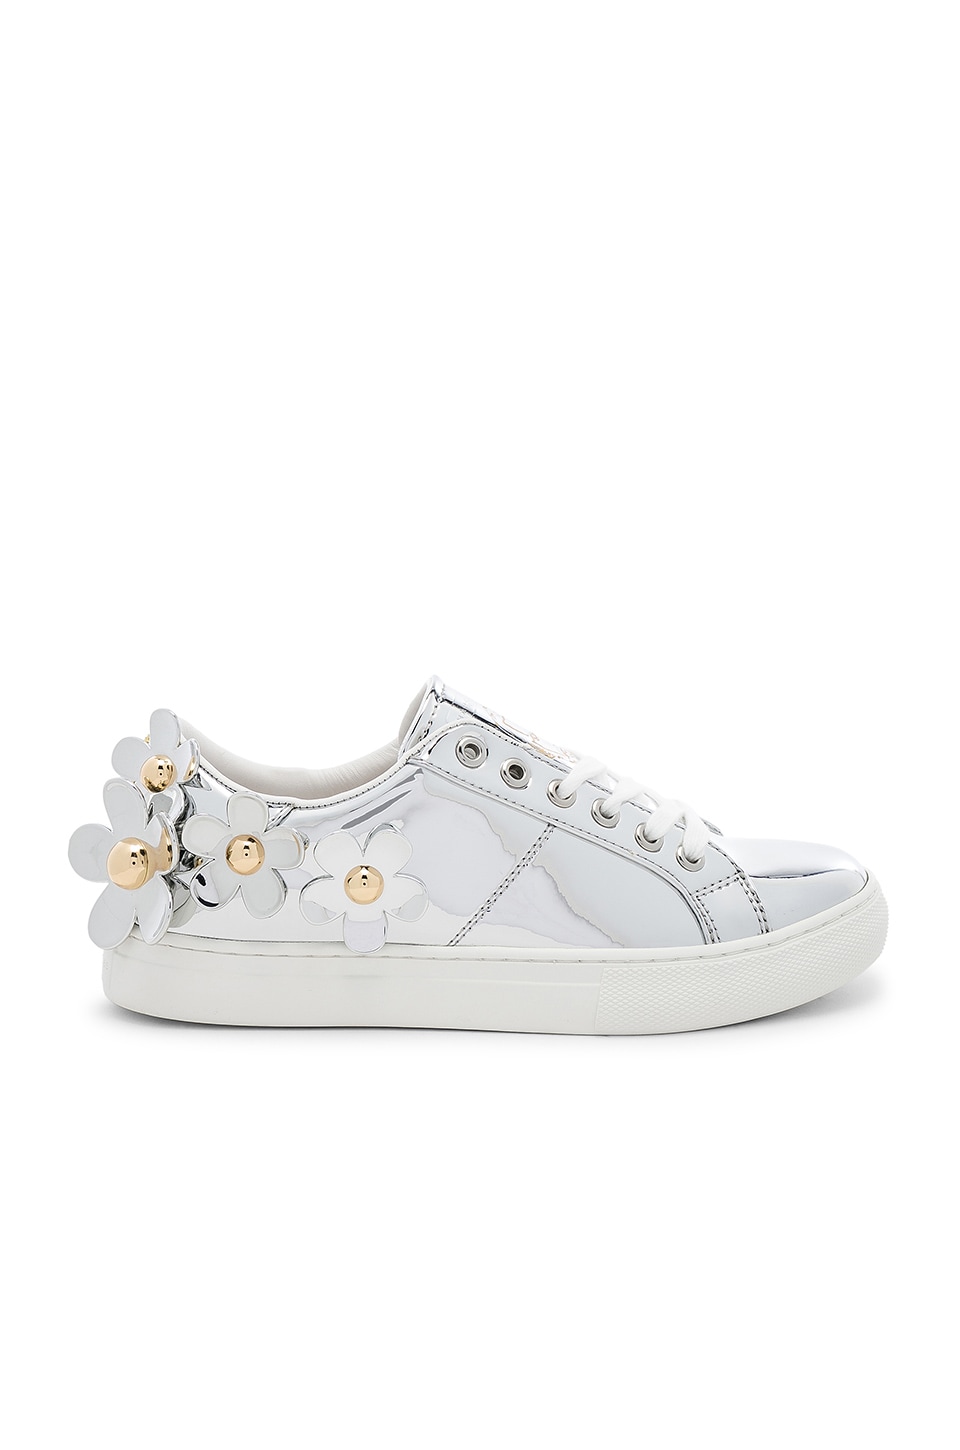 MARC JACOBS Daisy Trainer